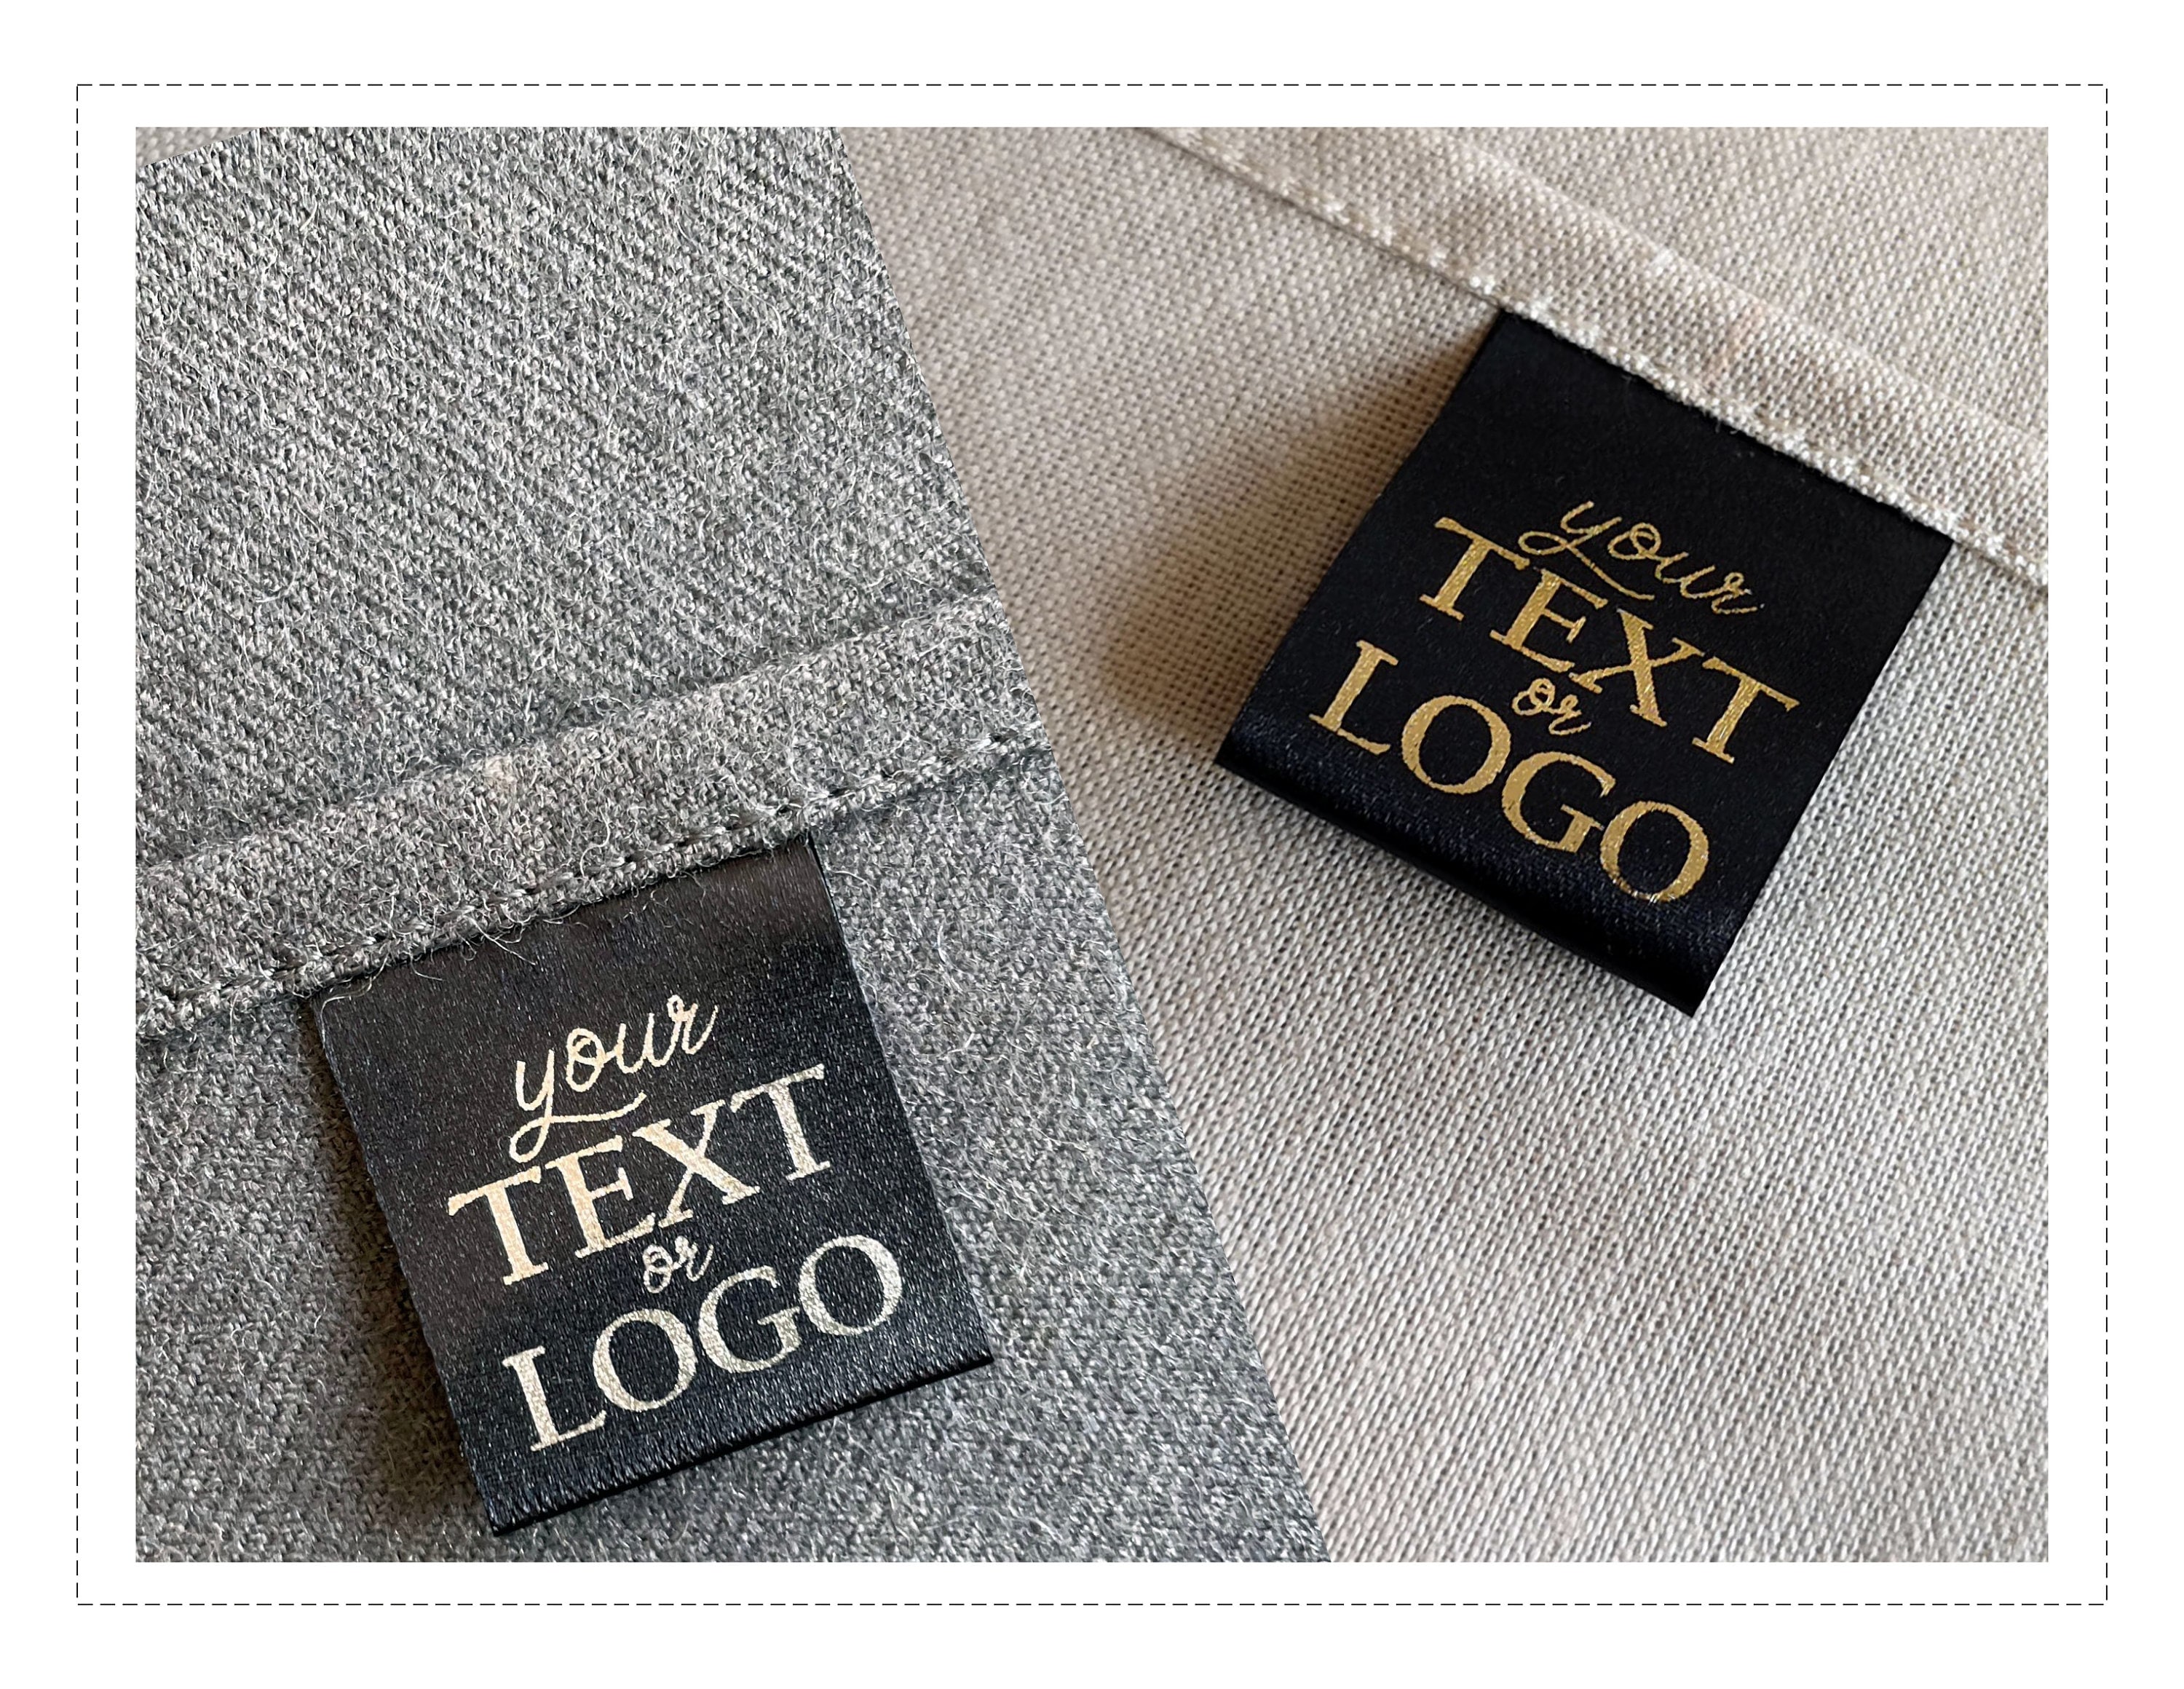 Custom White Labels, Ink: Black, Red, Blue, Green, Gold or Silver, Fold  Over Satin Brand Tags 